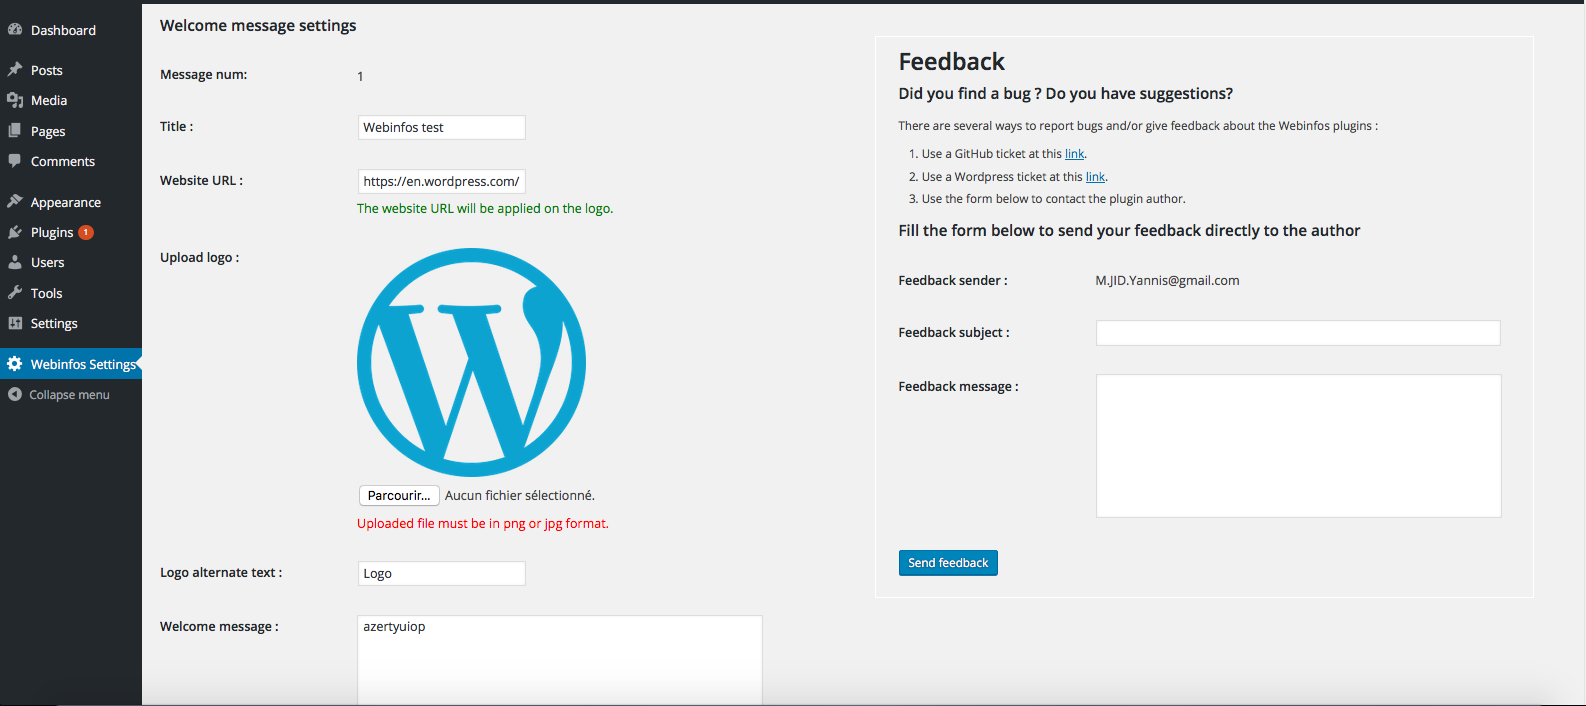 This is the setting panel of the plugin : the message settings on the left and the feedback form on the right.